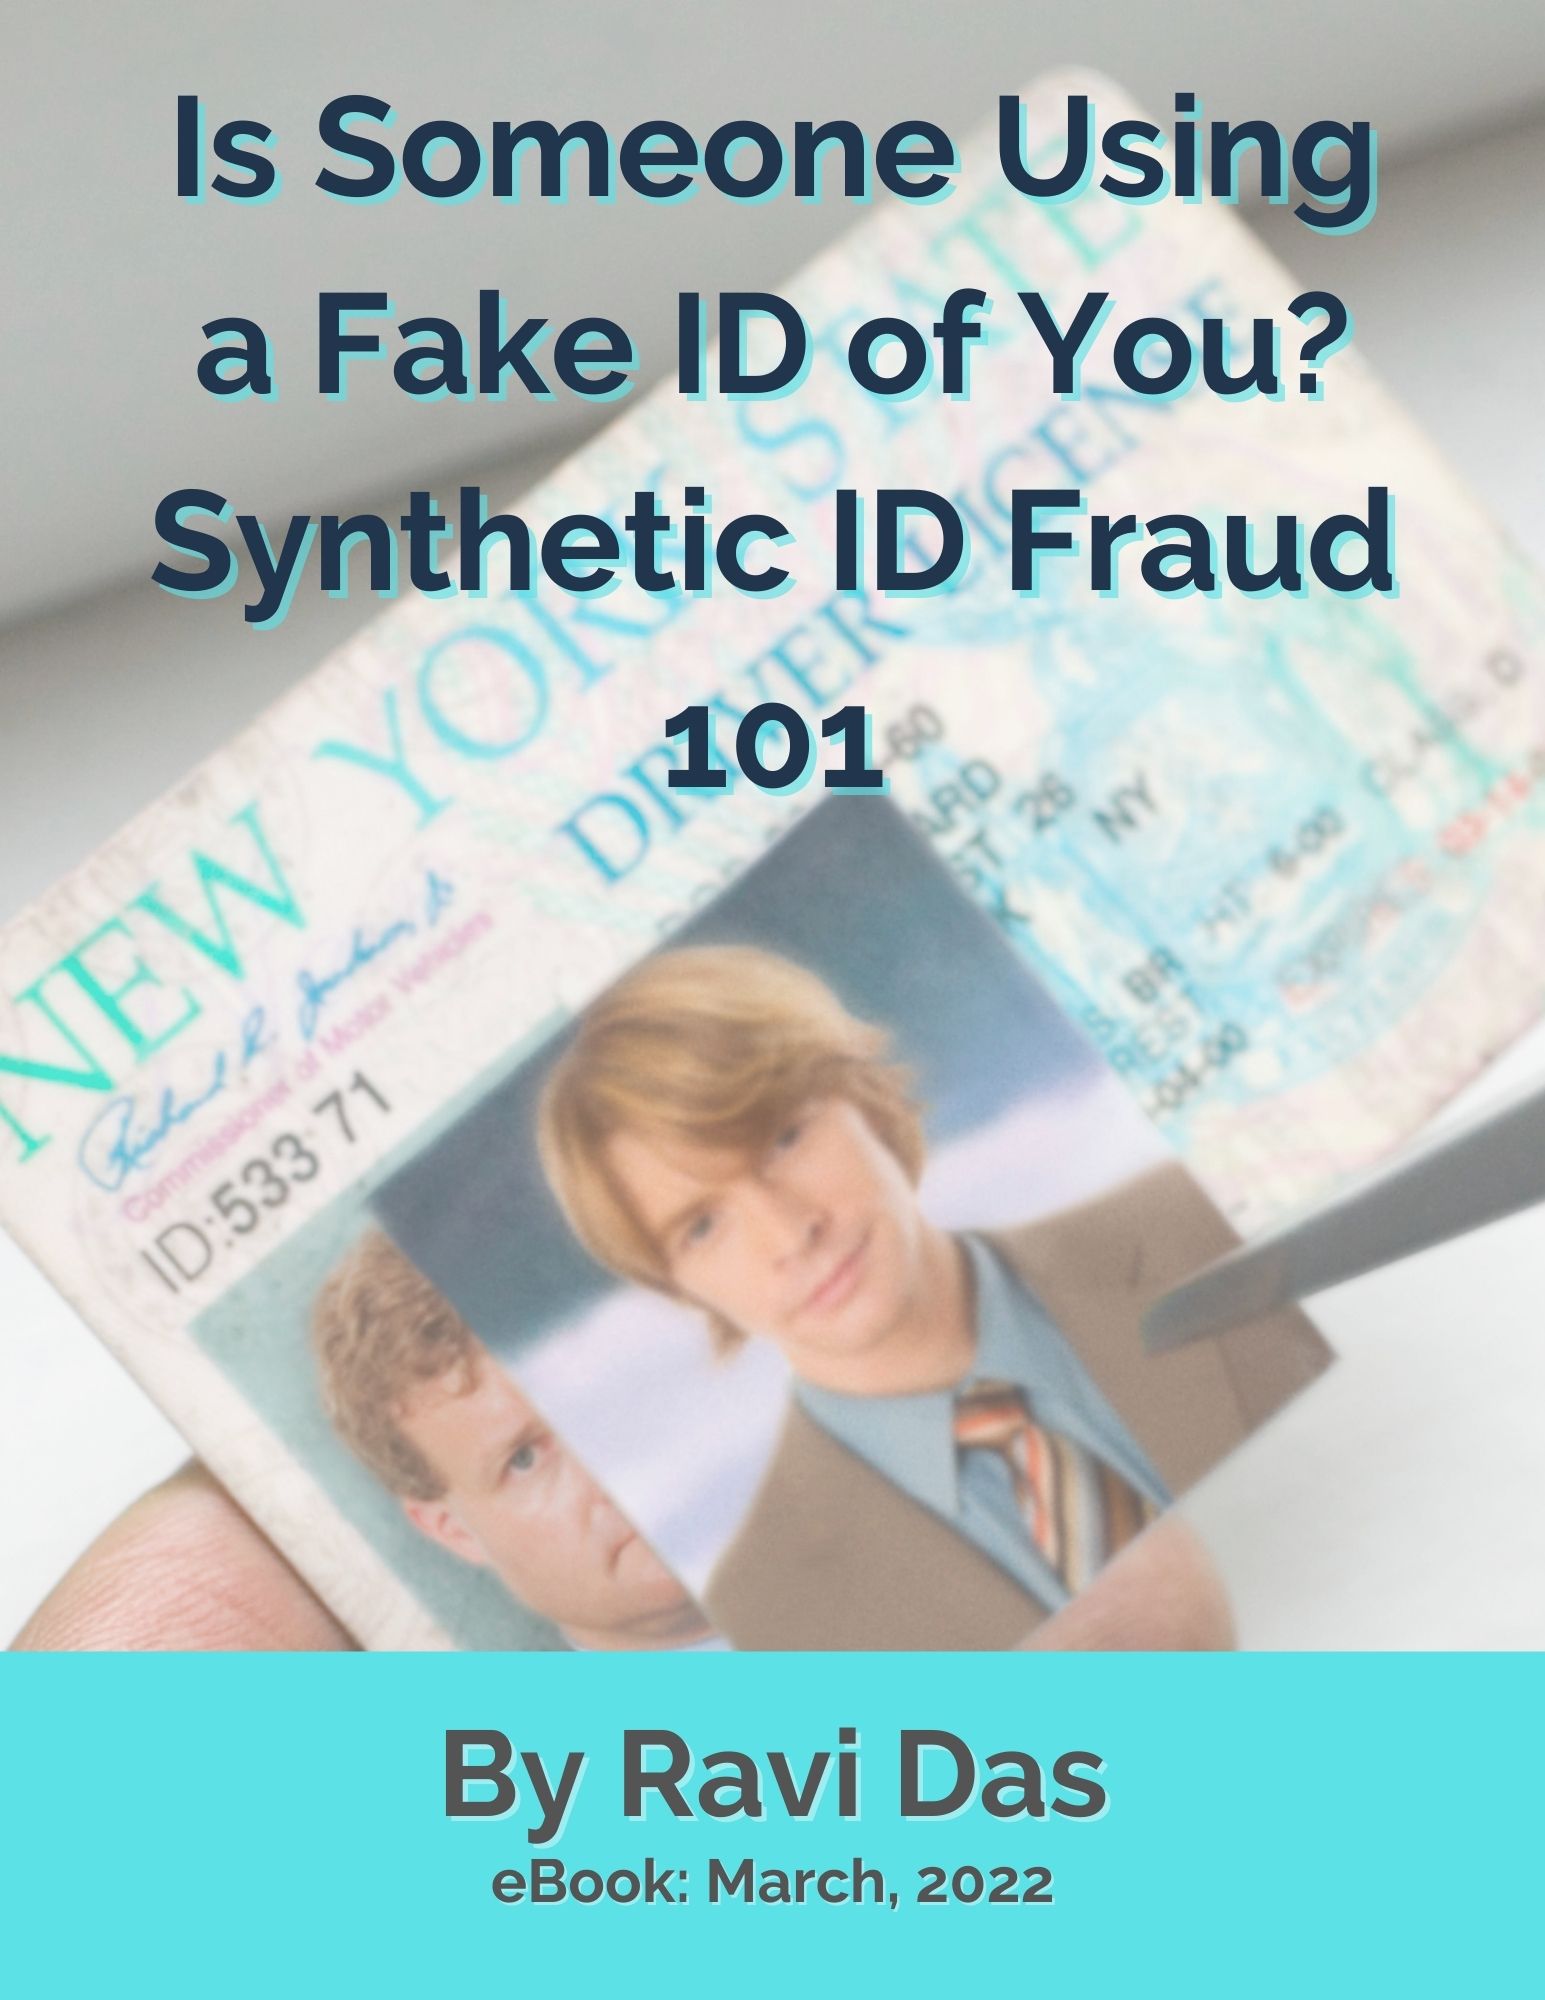 Synthetic ID Fraud e-Book